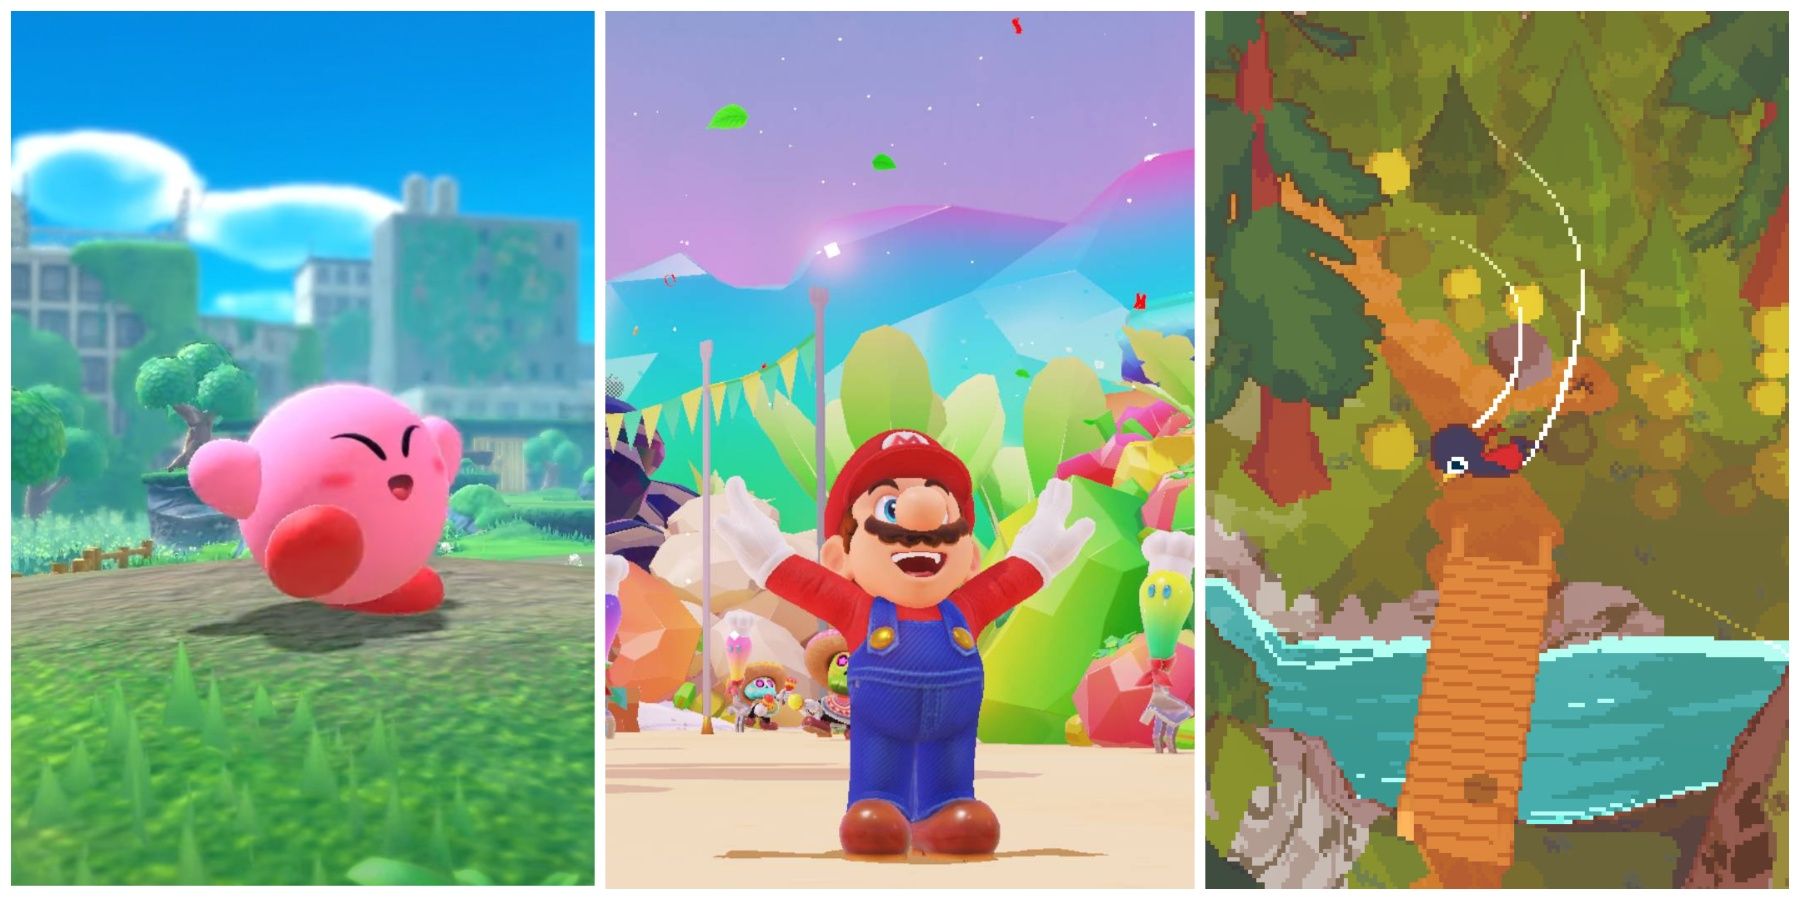 Featured image of Nintendo Switch 3D platformers Kirby and the Forgotten Land, Super Mario Odyssey, and A Short Hike 